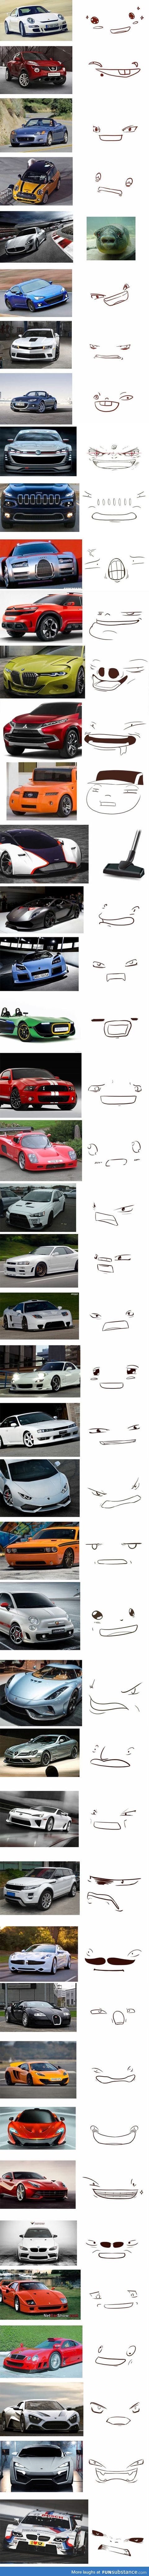 Cars and their faces